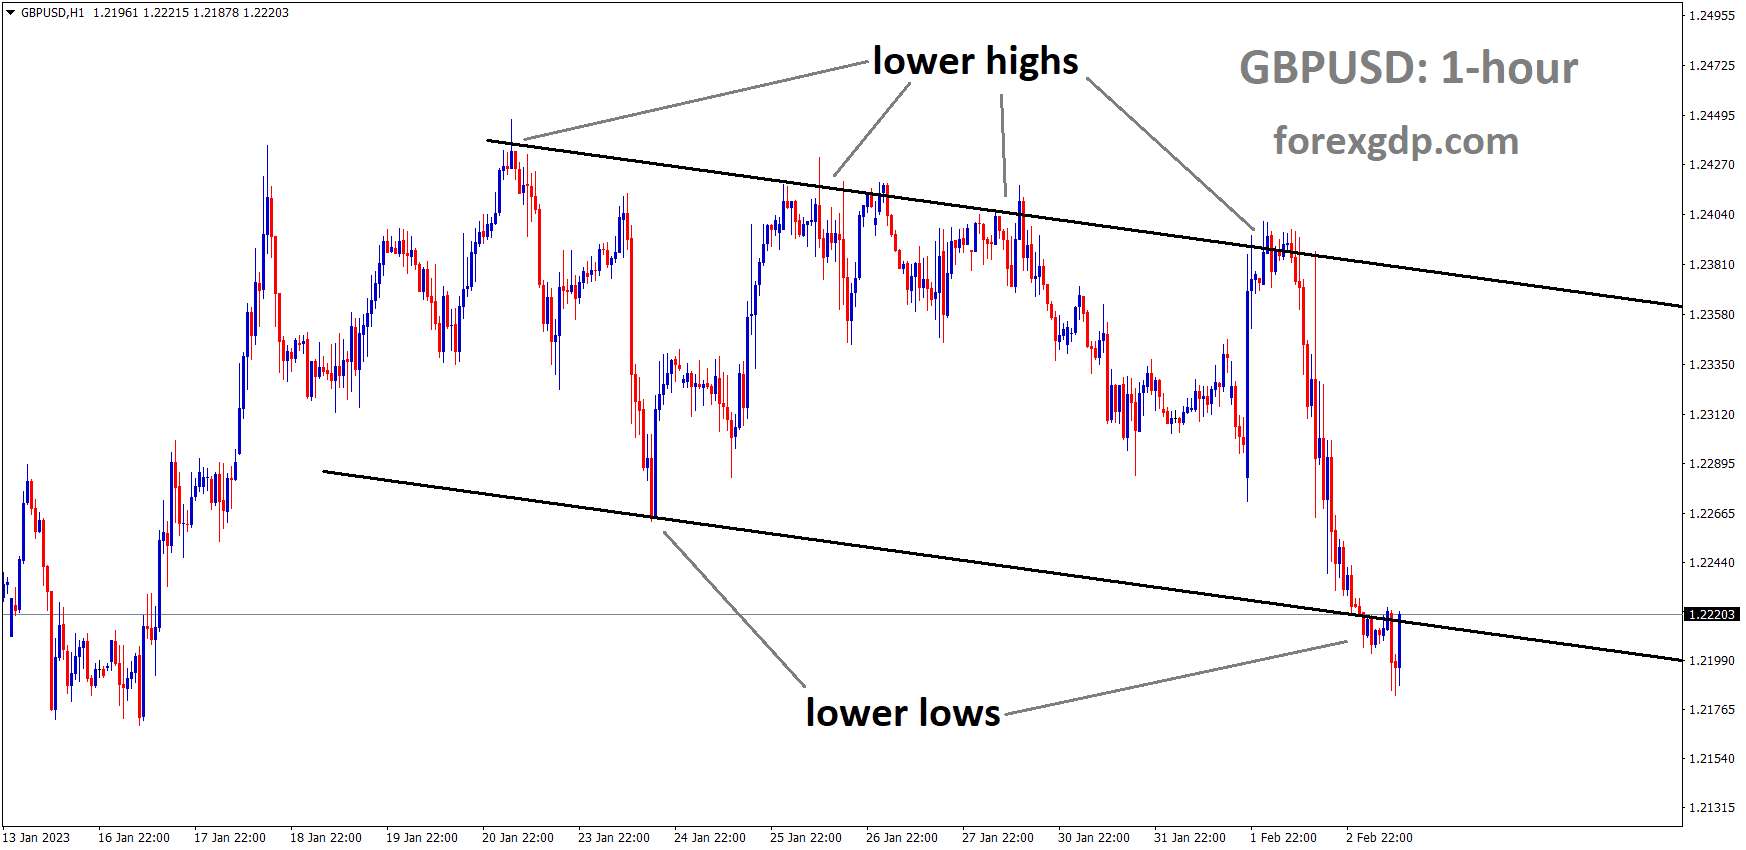 GBPUSD is moving in the Descending channel and the market has reached the lower low area of the channel